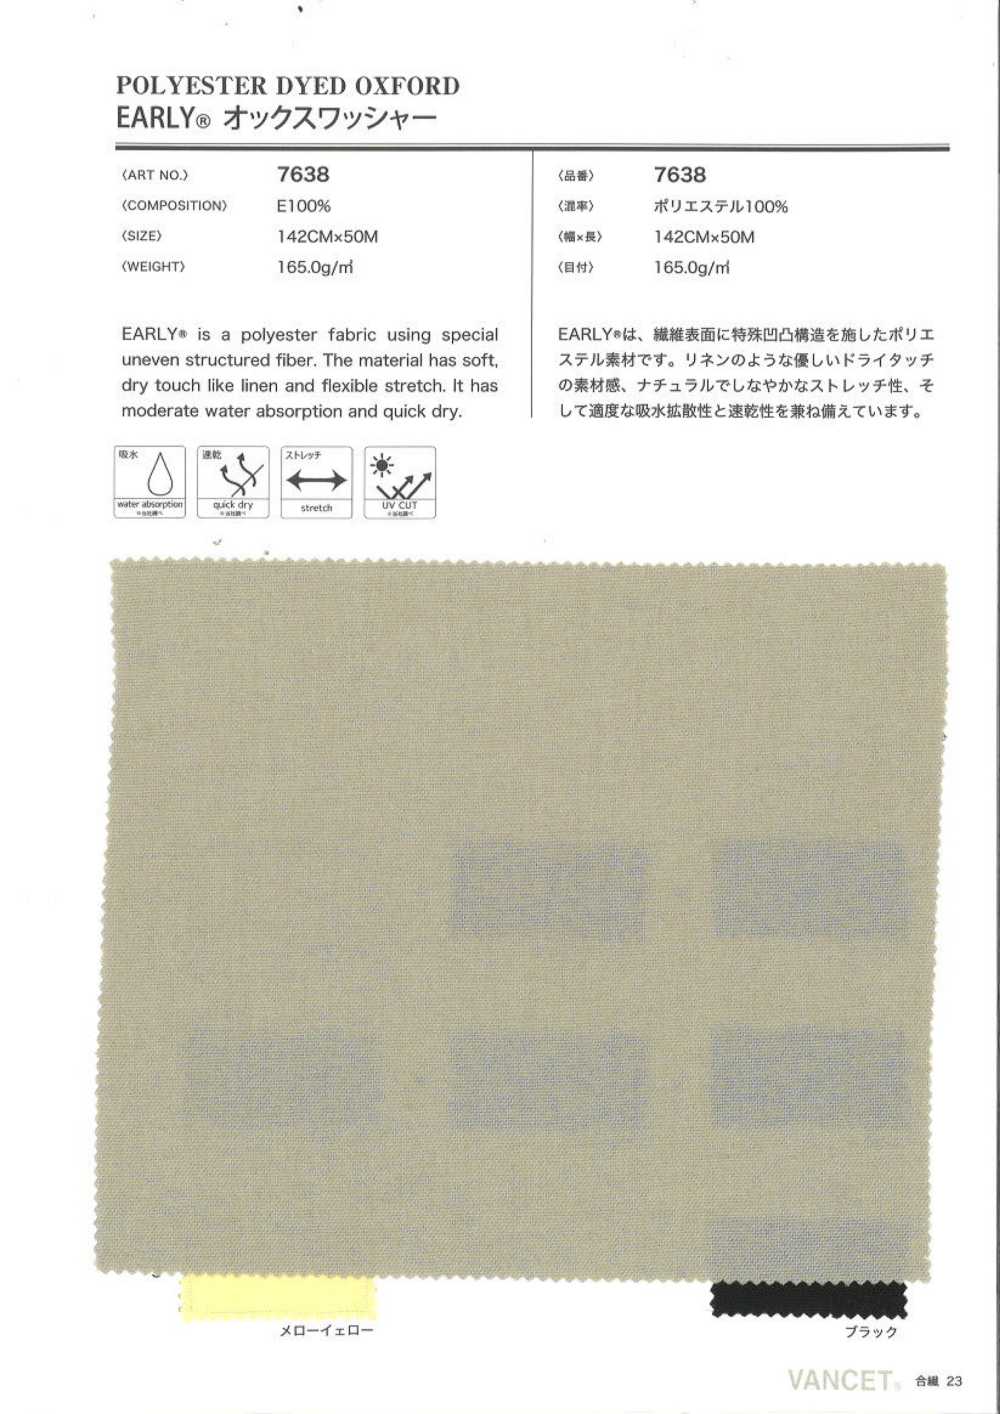 7638 EARLY® Oxford Processing[Textile / Fabric] VANCET